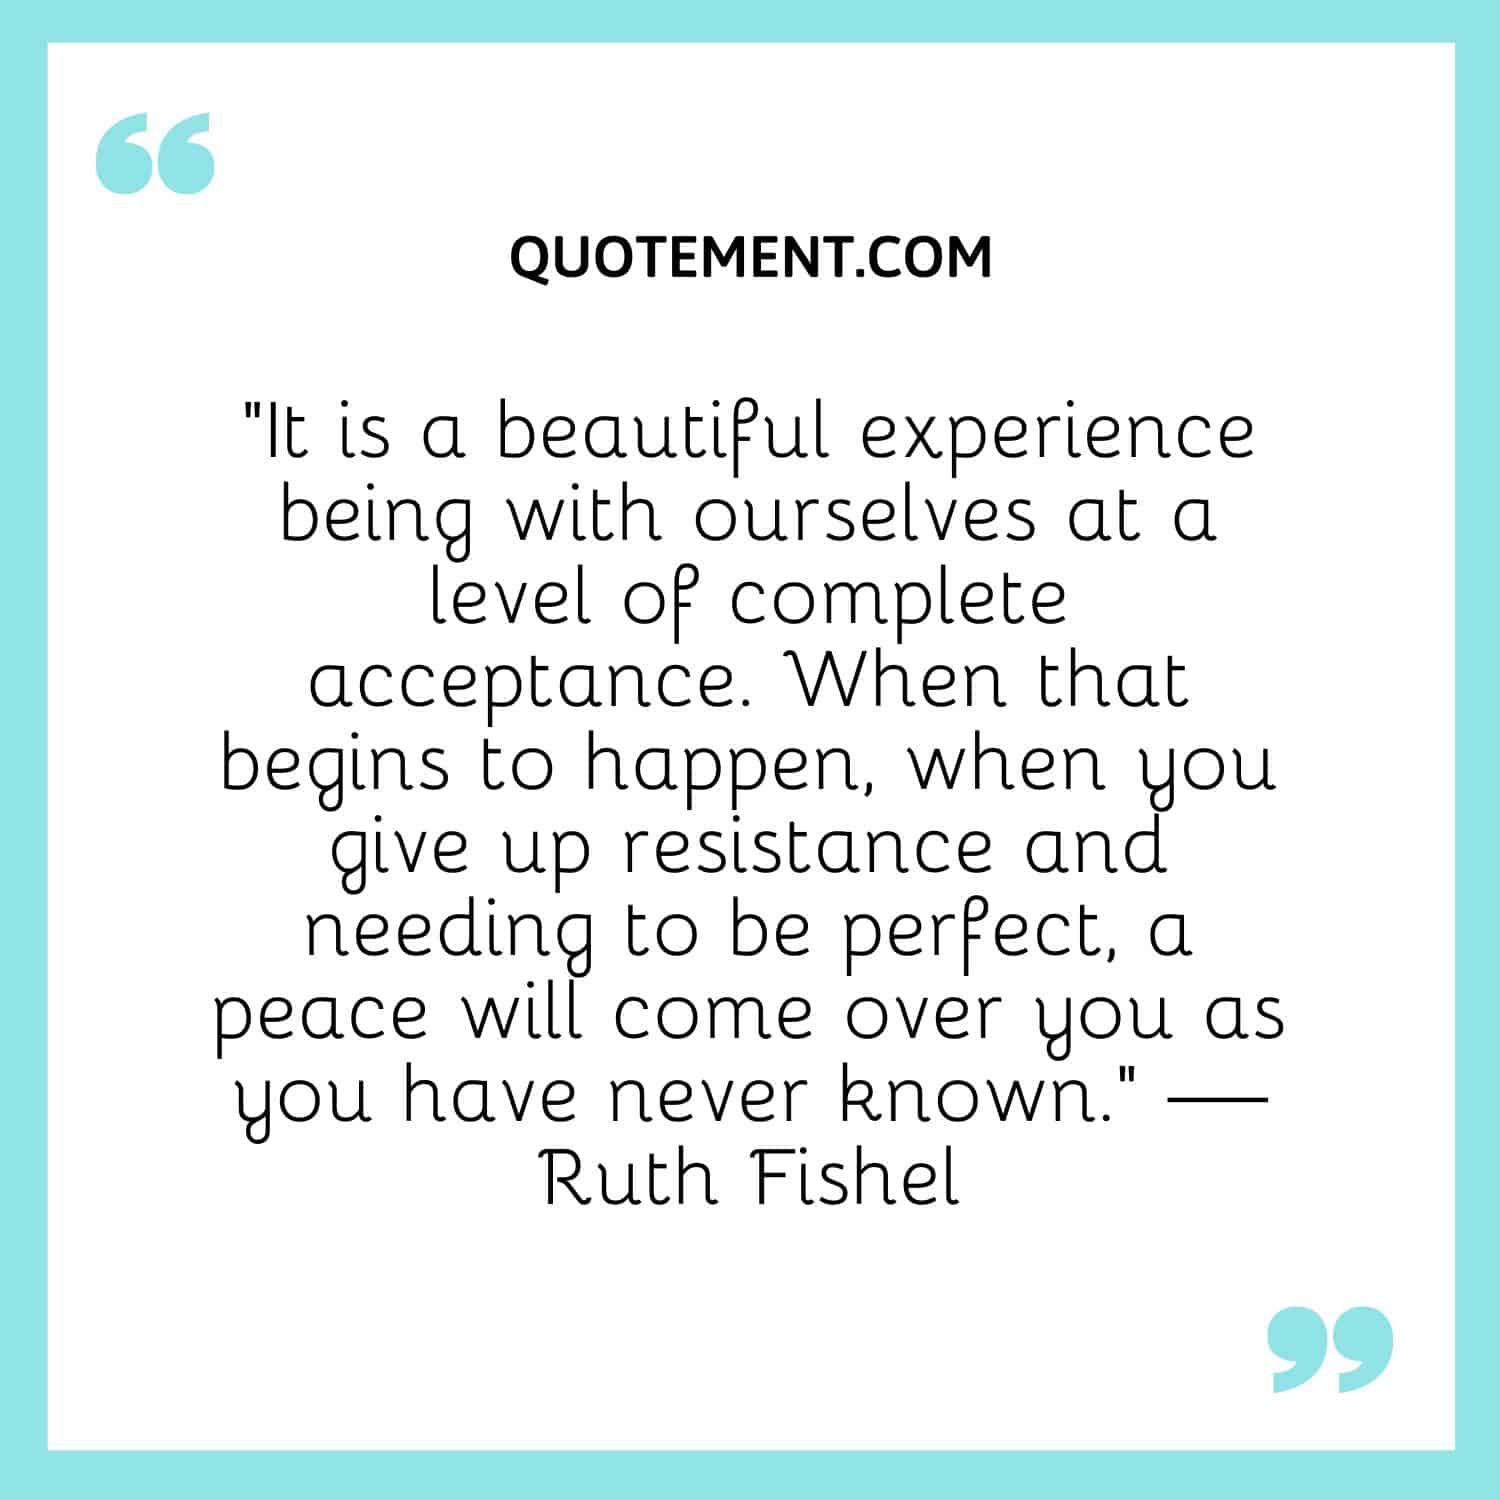 It is a beautiful experience being with ourselves at a level of complete acceptance